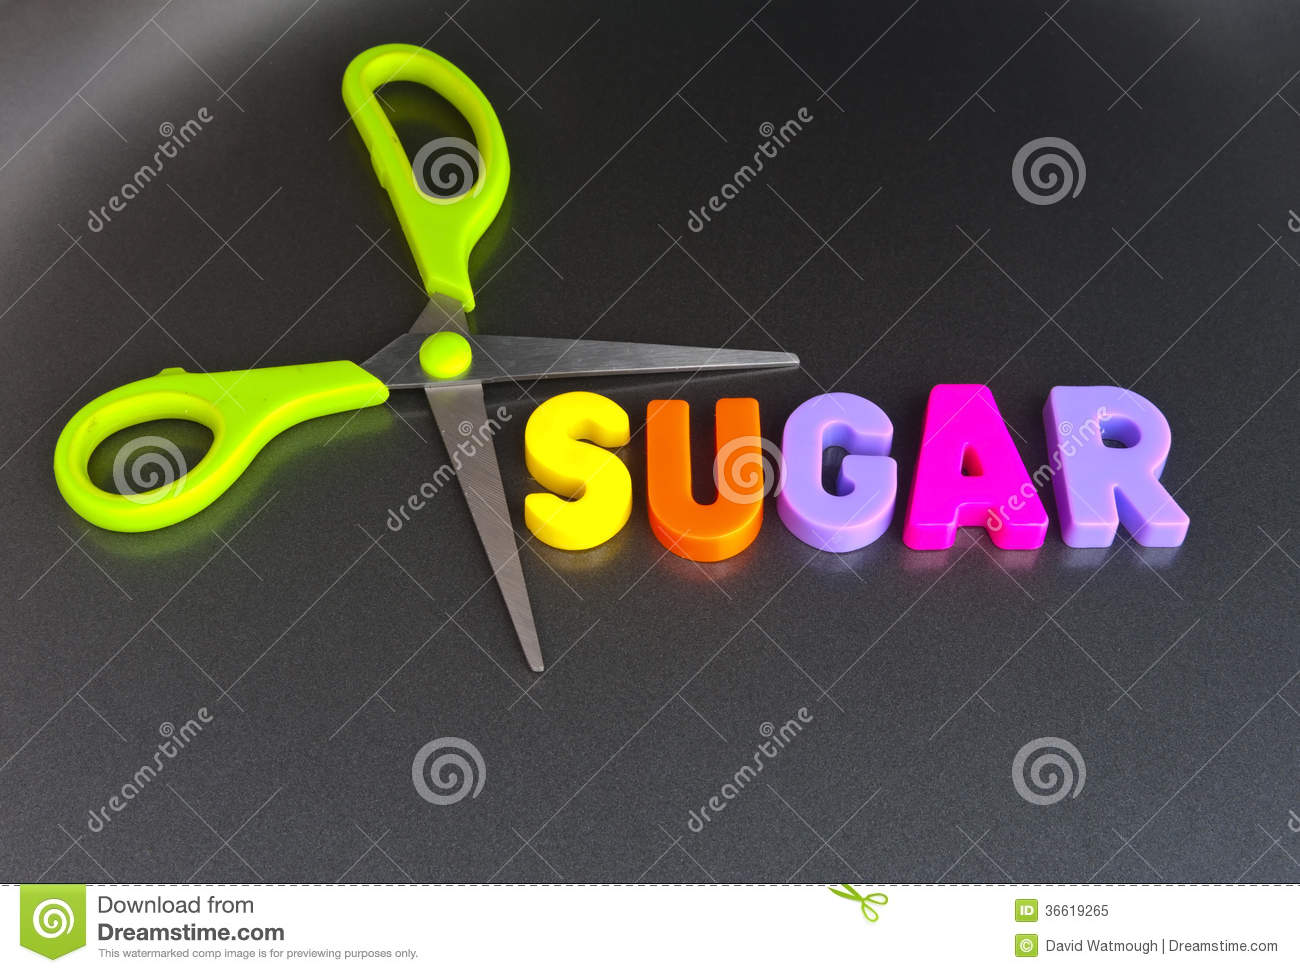 Cut down on sugar stock image. Image of reducing ...